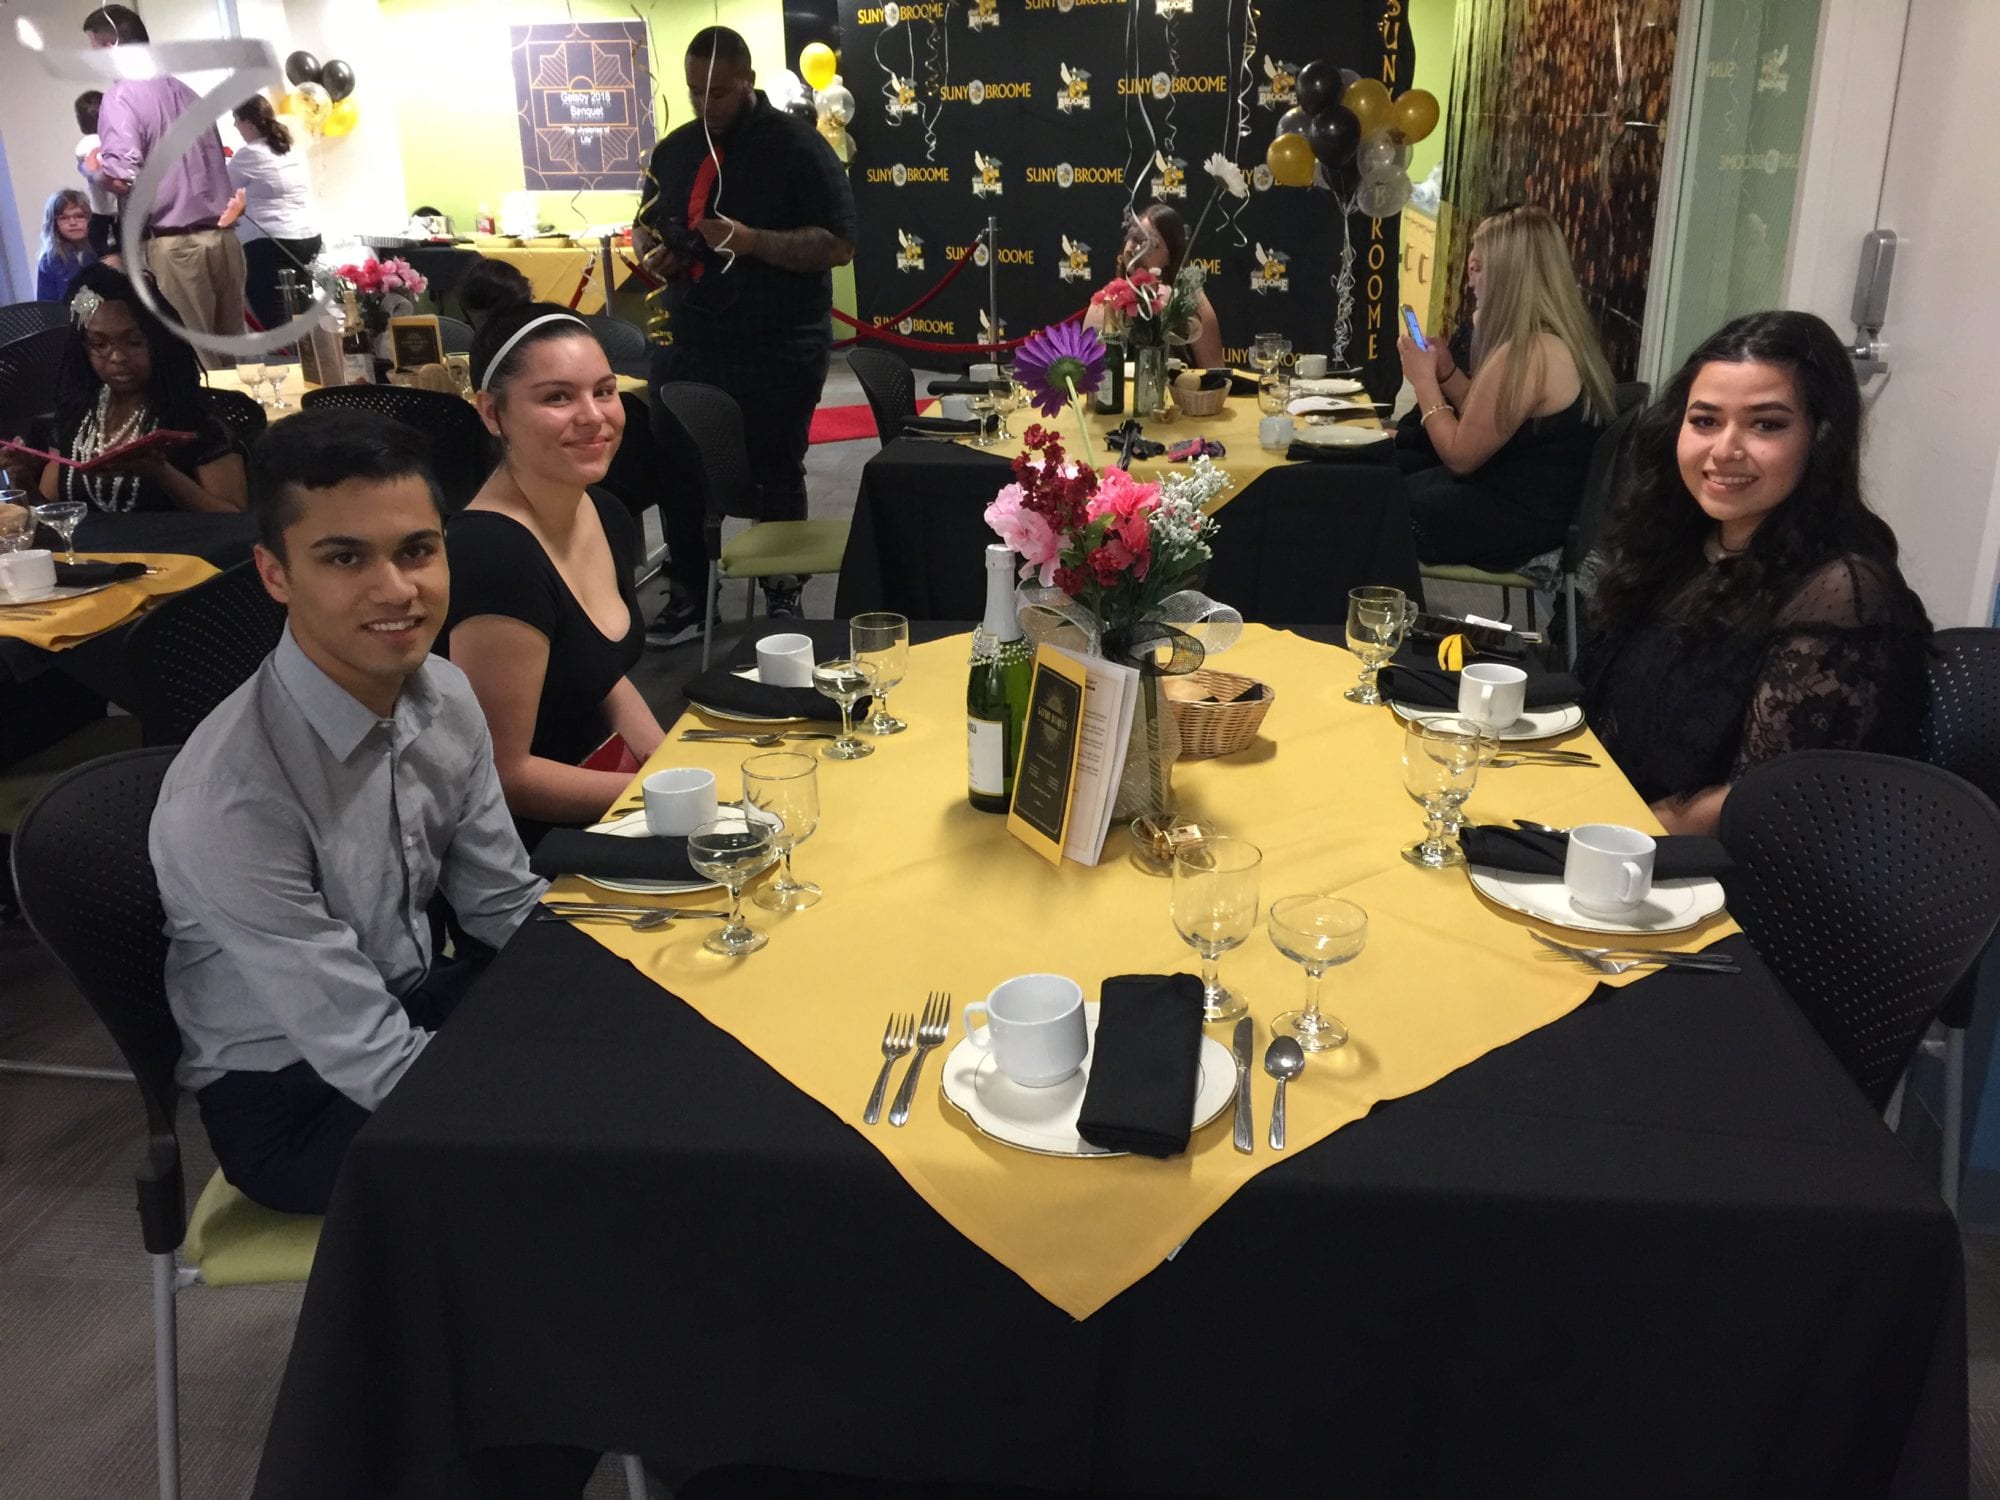 Dressed to the nines: Student Village celebrates seniors with the Gatsby Banquet